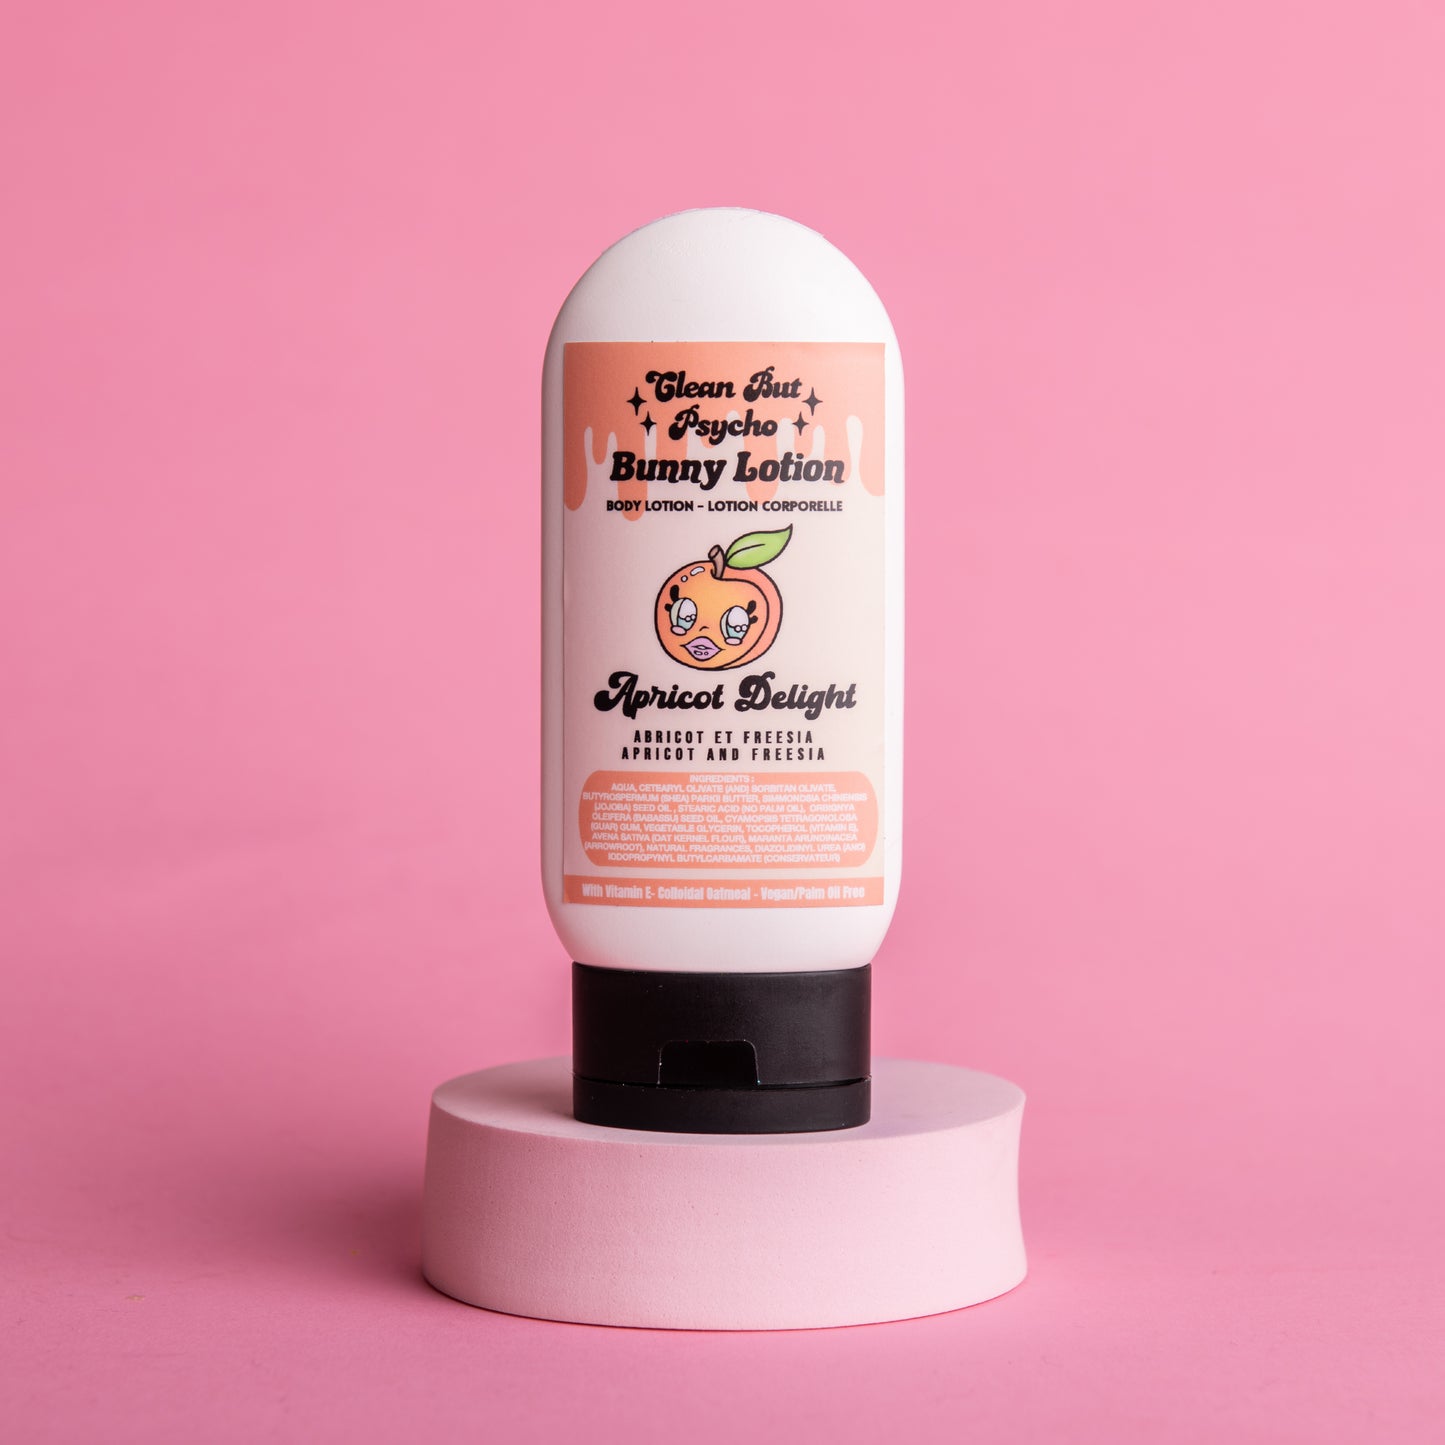 Bunny Lotion - Apricot Delight 🌺